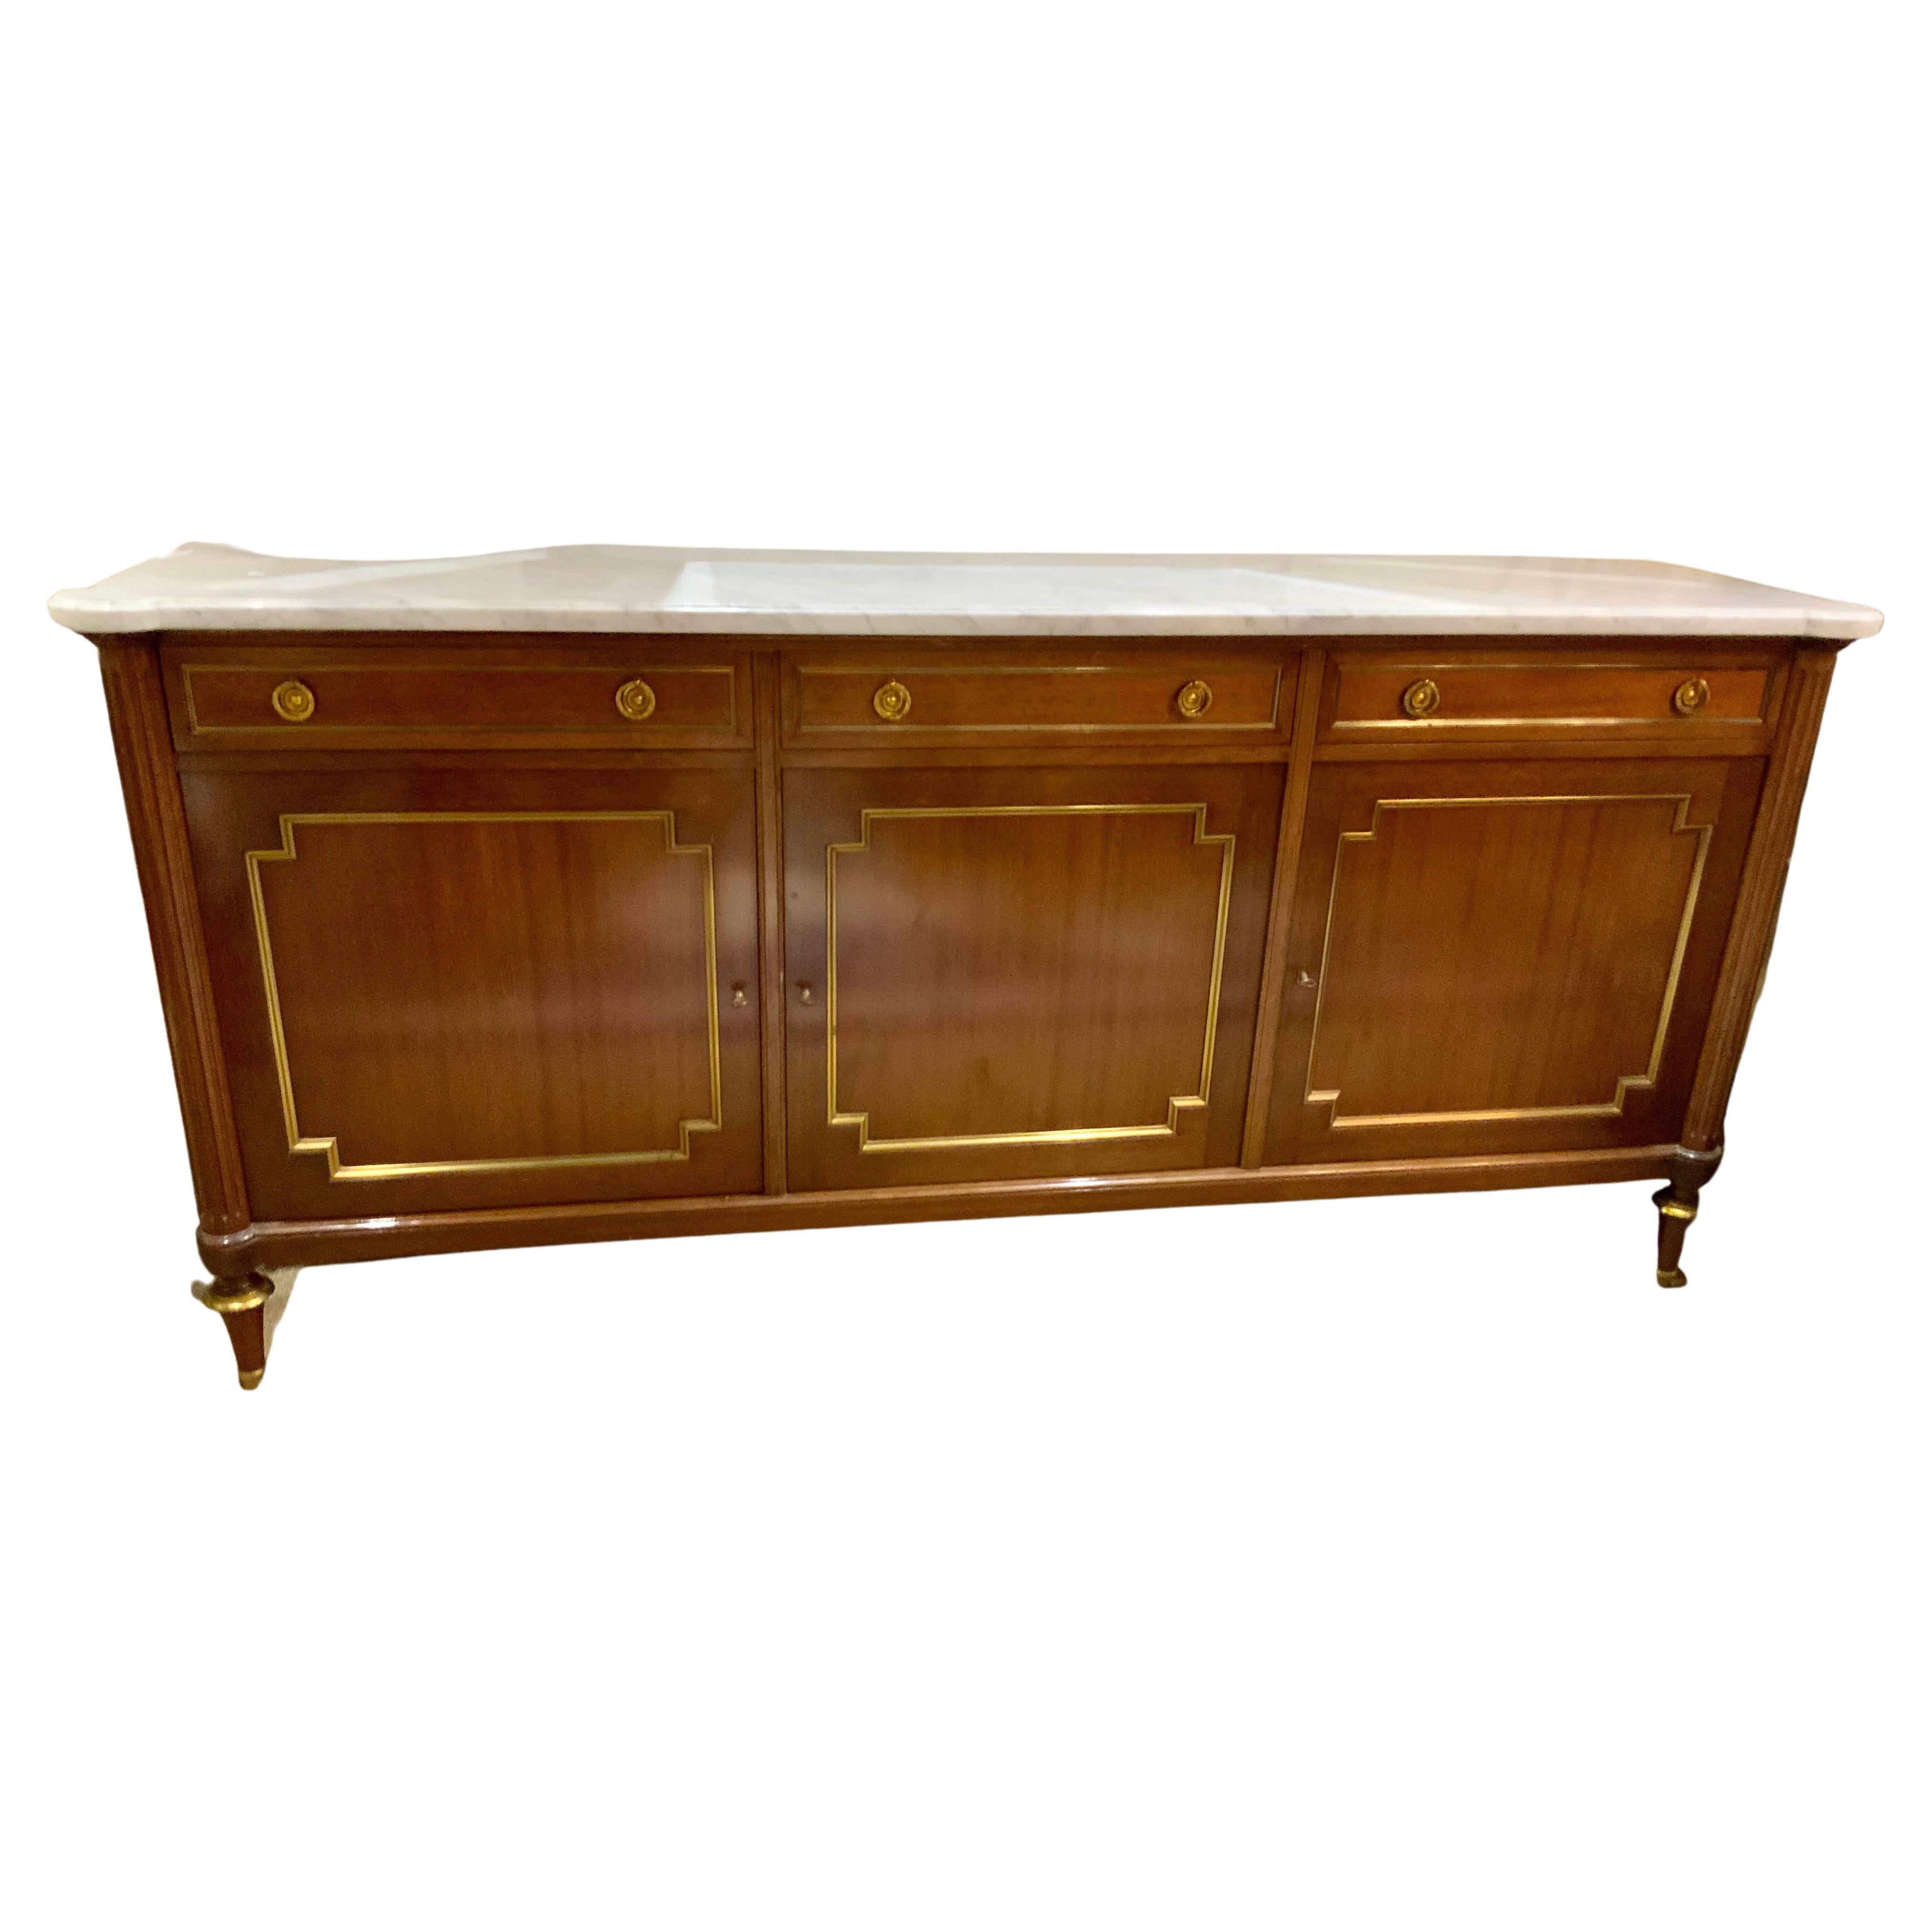 Louis XVI-Style Mahogany Buffet with Gilt Accents and Bronze Hardware